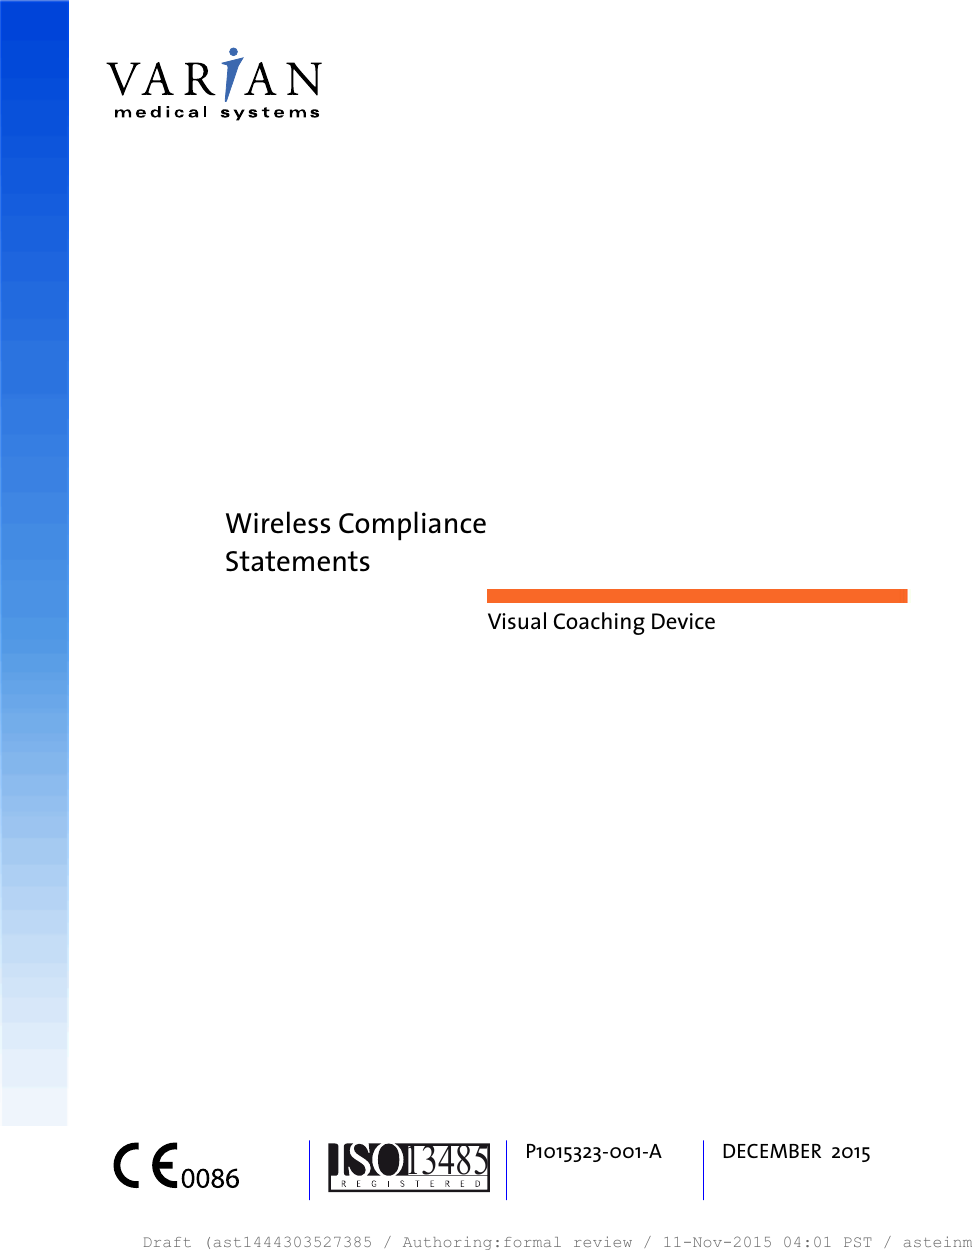 Wireless ComplianceStatementsVisual Coaching Device13485P1015323-001-A DECEMBER  2015Draft (ast1444303527385 / Authoring:formal review / 11-Nov-2015 04:01 PST / asteinma)